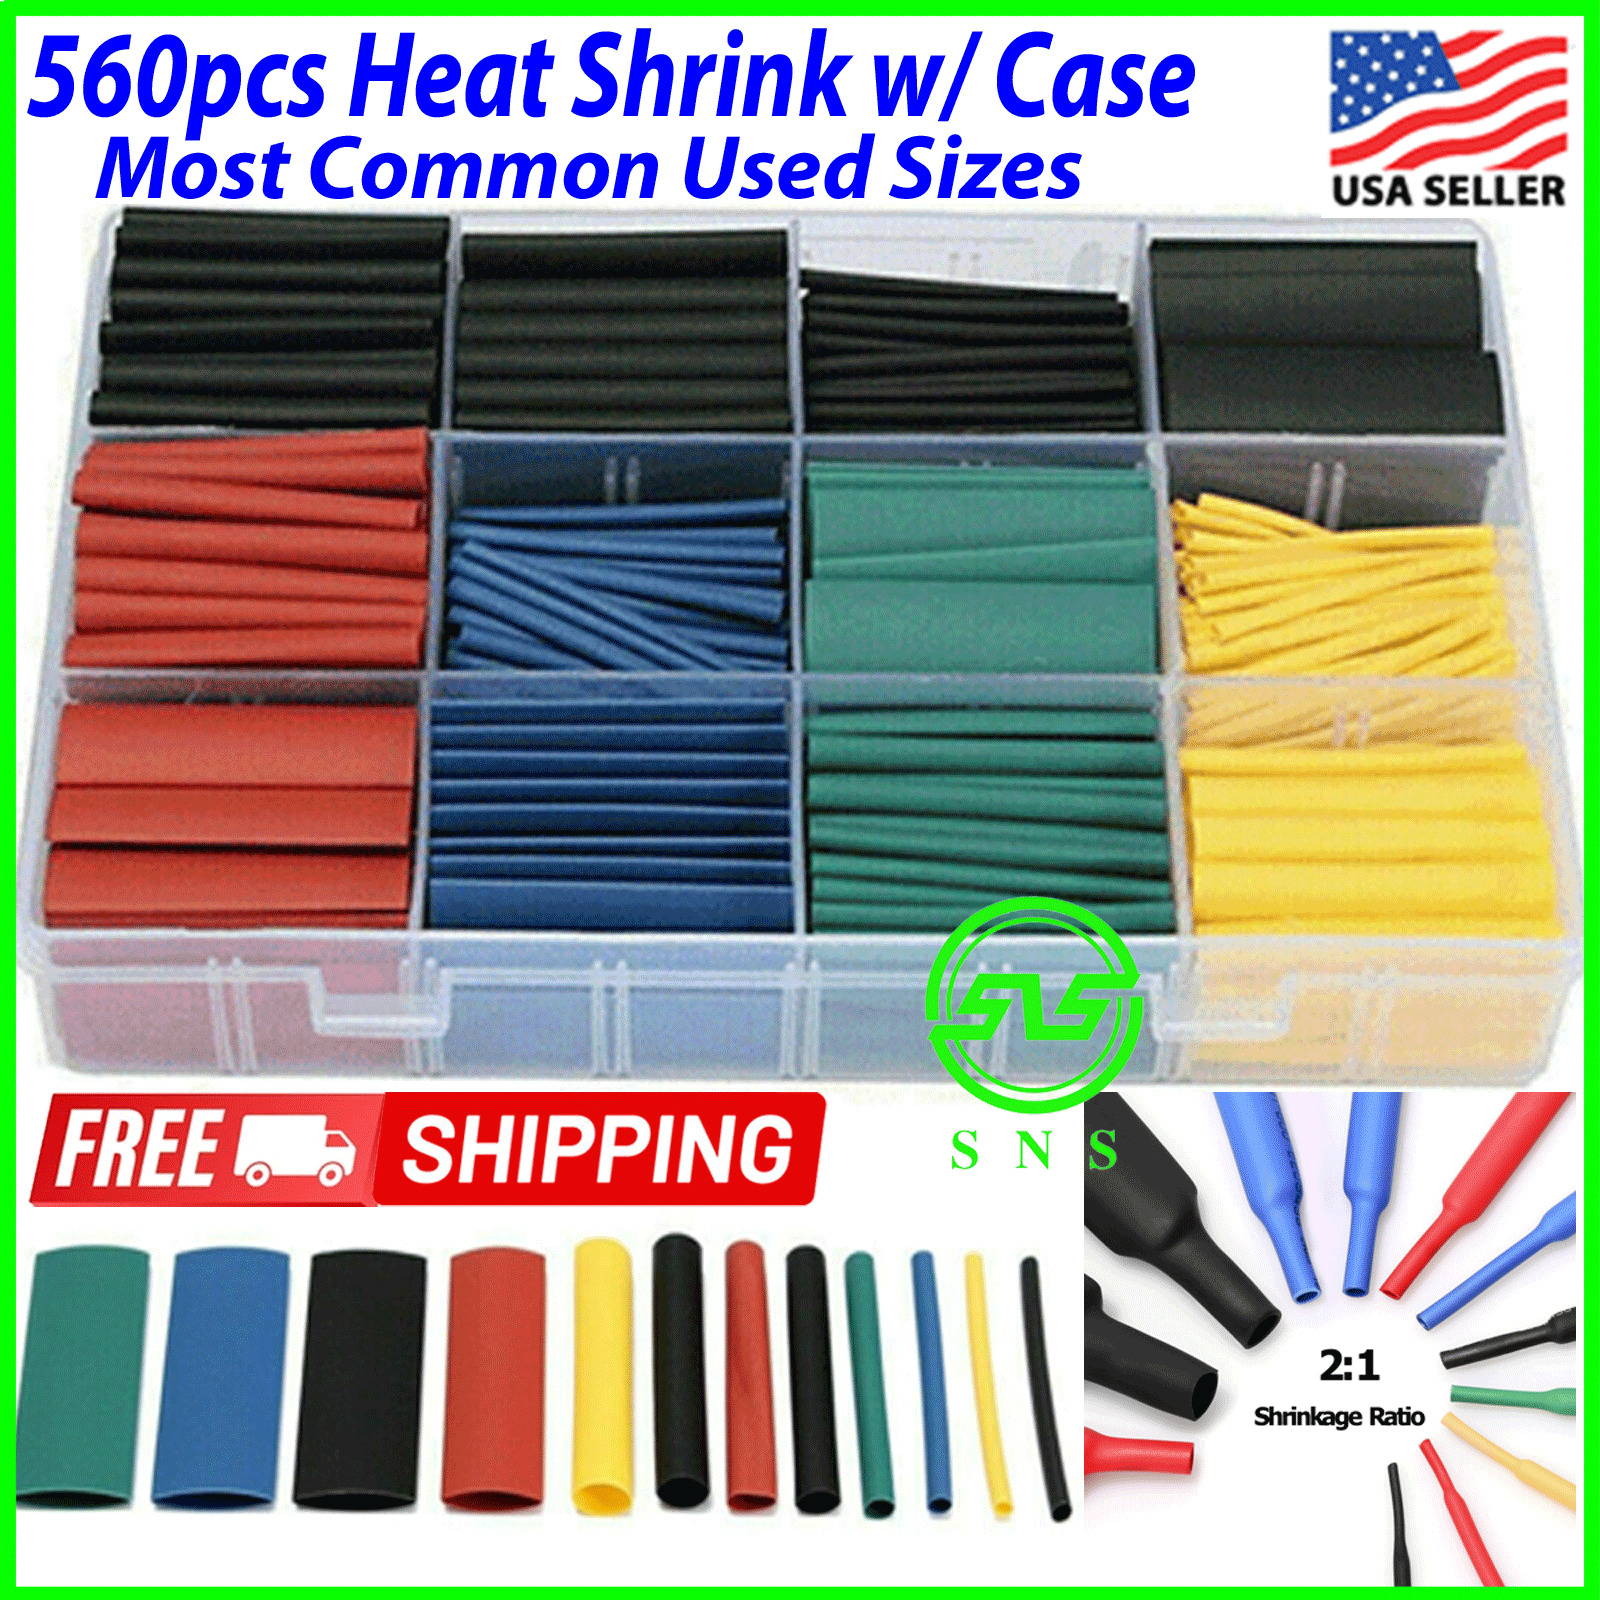 560Pcs HEAT SHRINK TUBING Insulation Shrinkable Tube 2:1 Wire Cable Sleeve W BOX